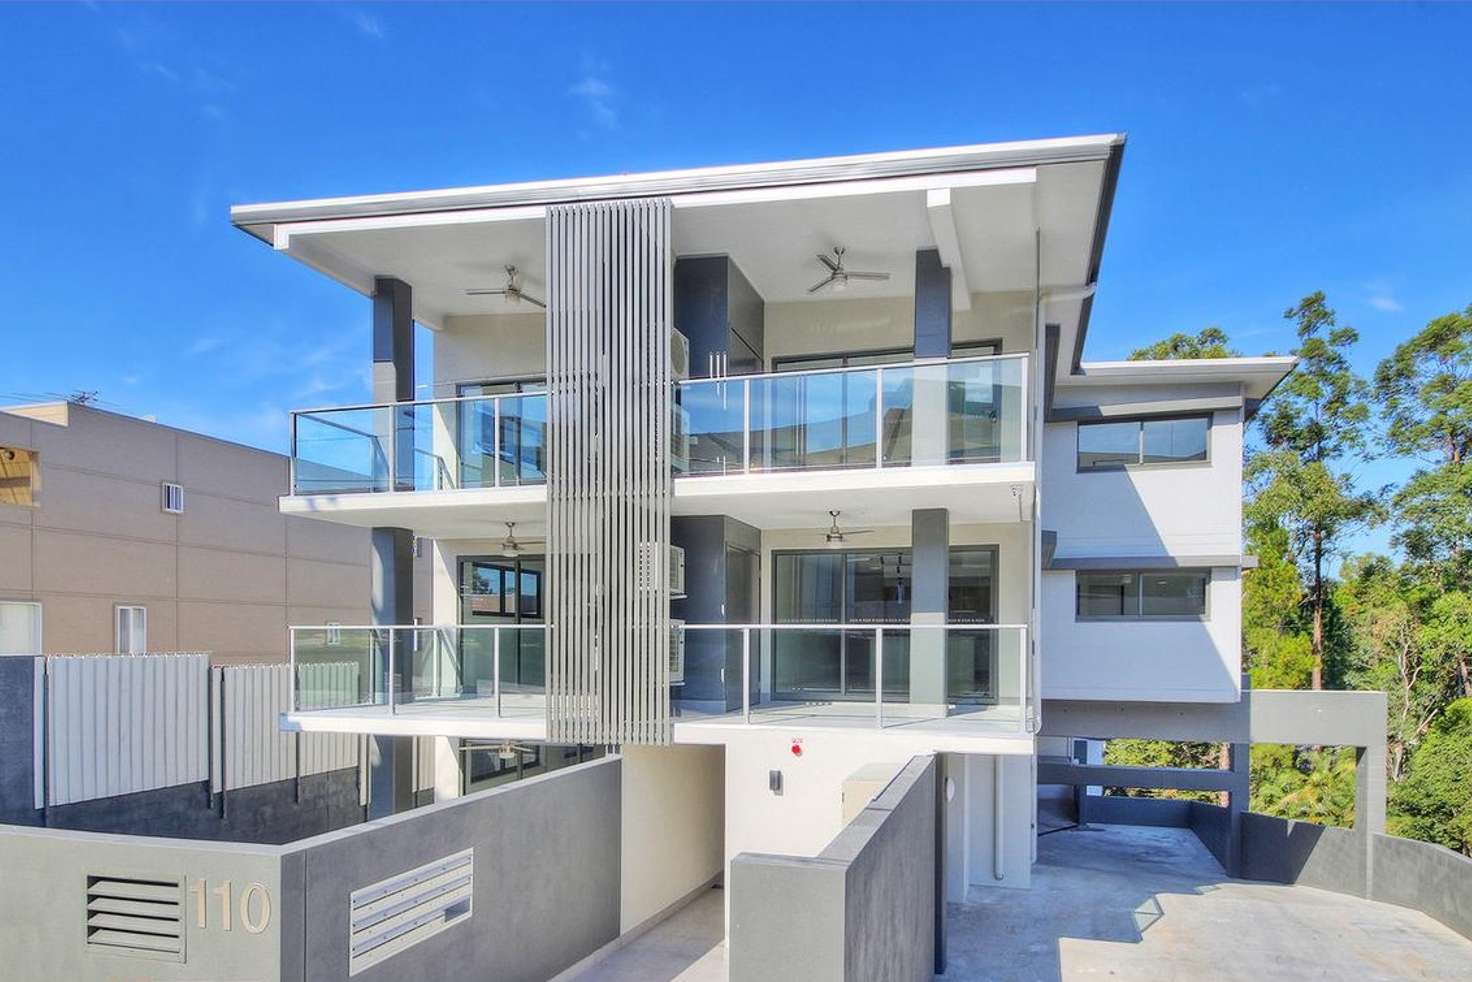 Main view of Homely apartment listing, 8/110 Nicholson Street, Greenslopes QLD 4120